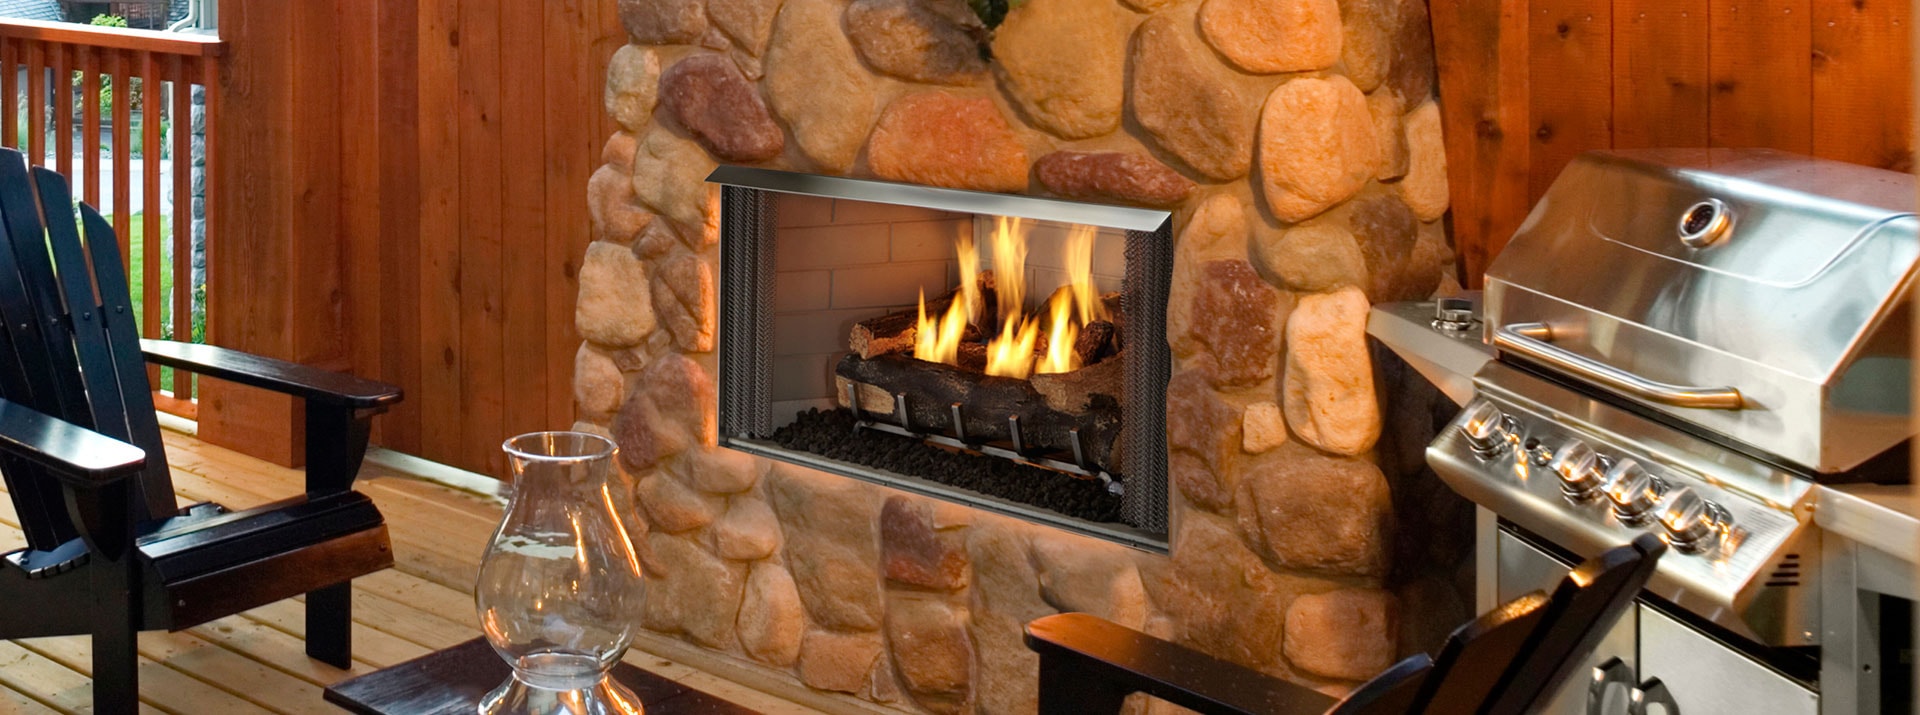 Ventless Gas Fireplace with Blower Elegant Outdoor Lifestyles Villa Gas Pact Outdoor Fireplace